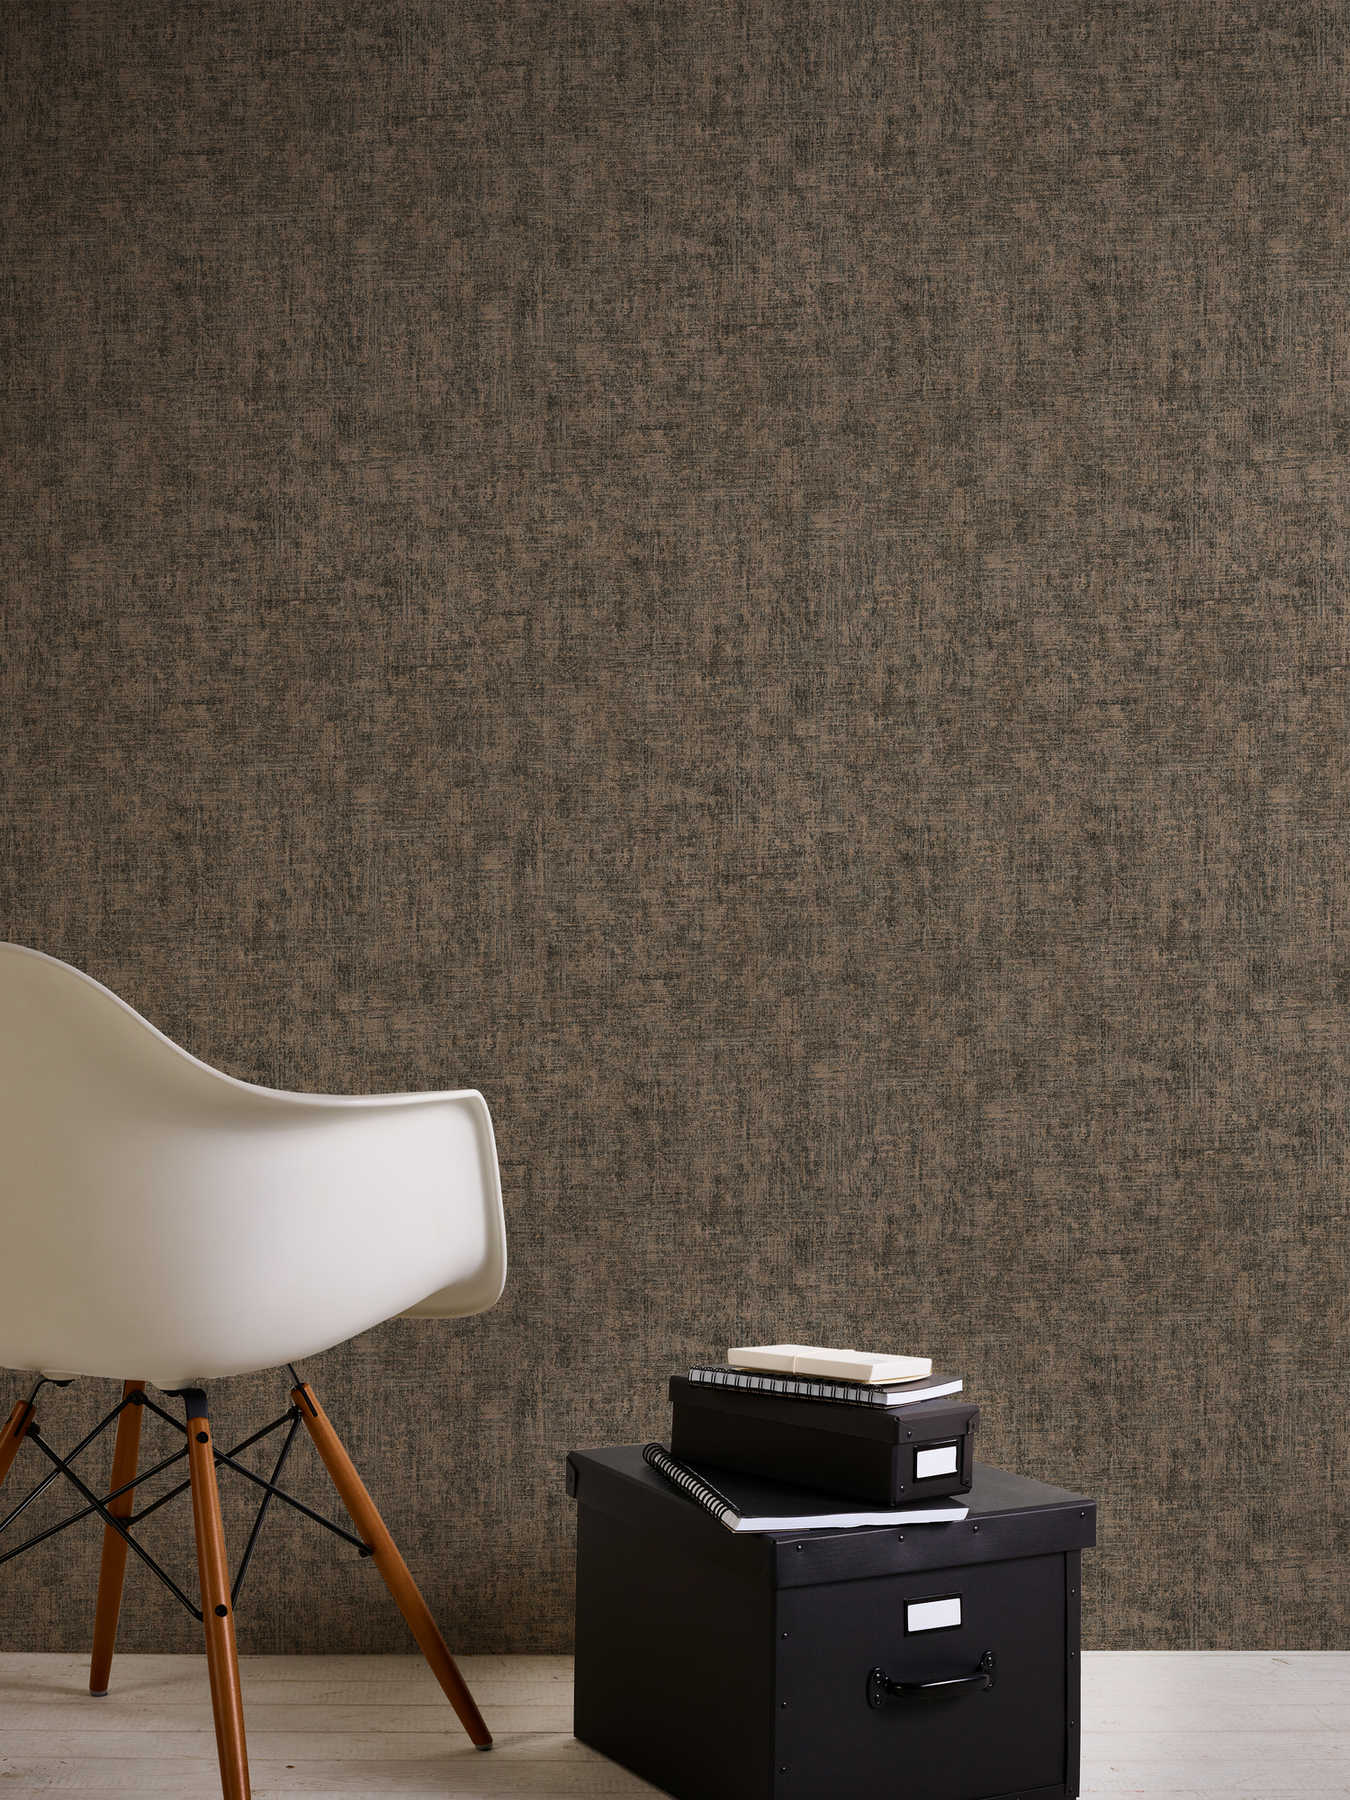             wallpaper brown gold mottled with noble metallic effect
        